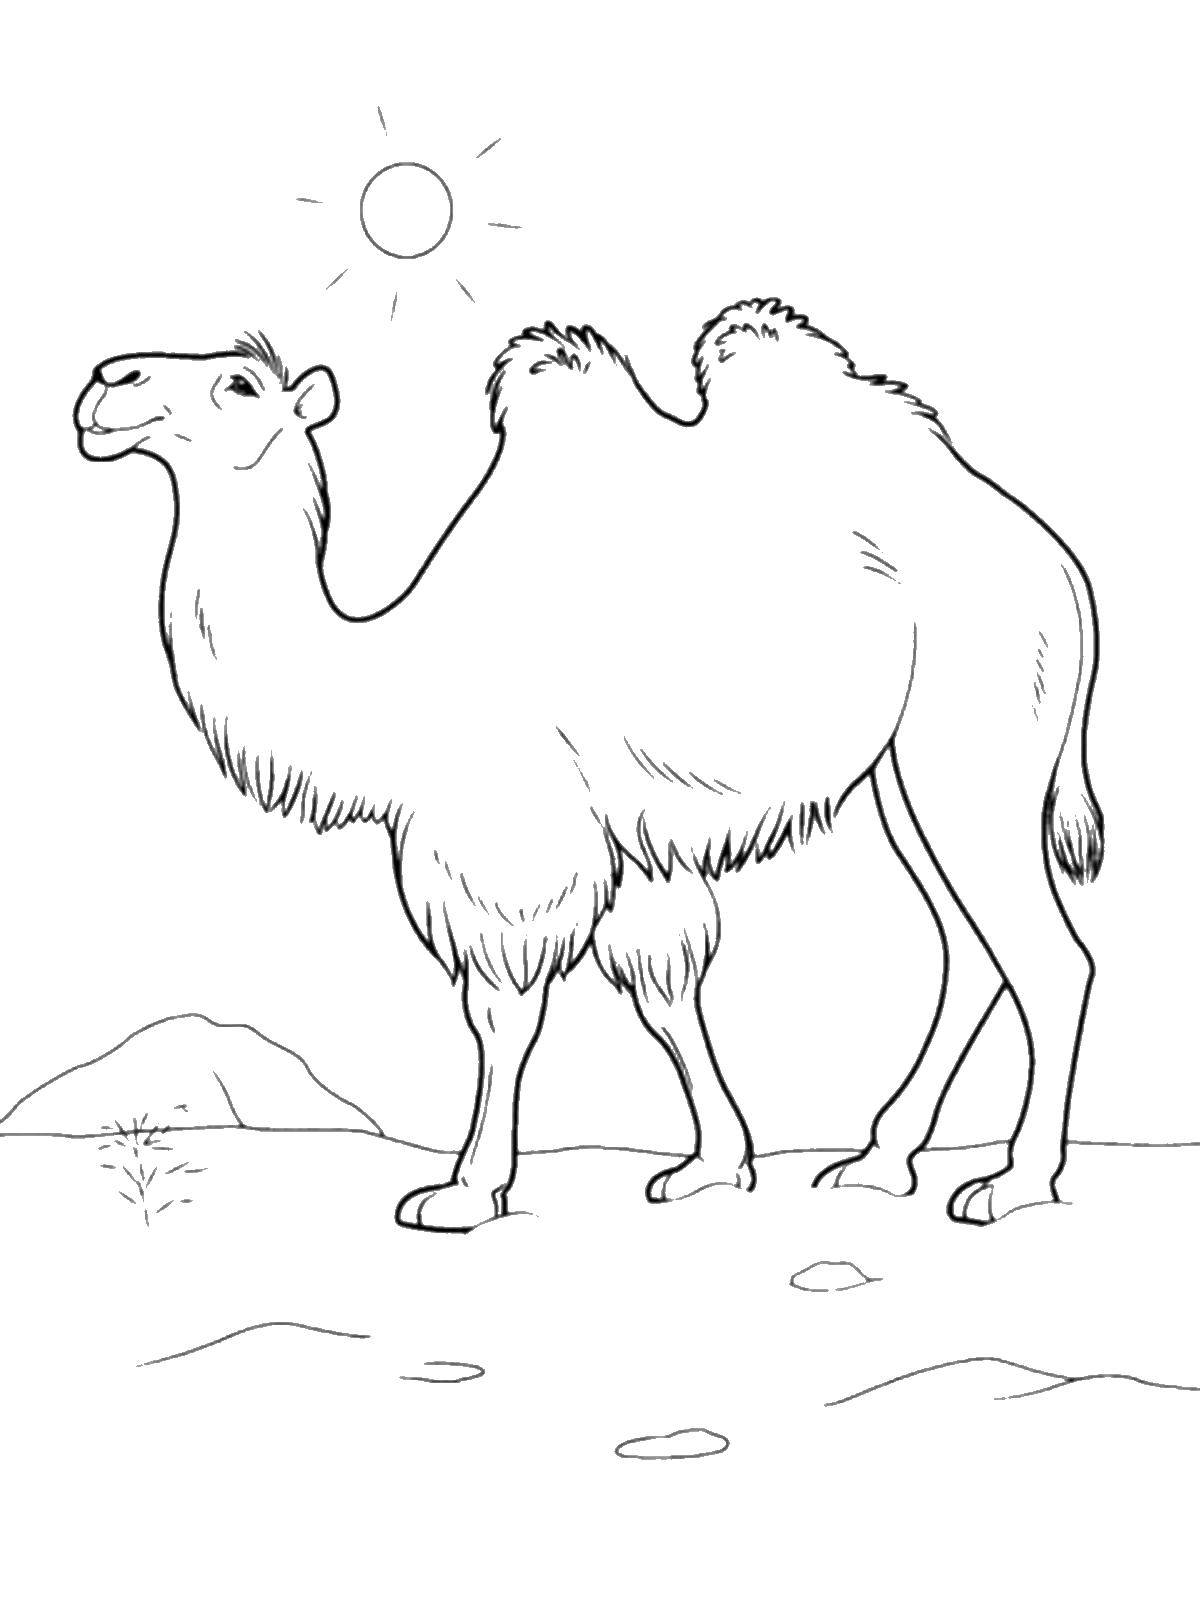 Coloring Bactrian camel. Category wild animals. Tags:  Camel.